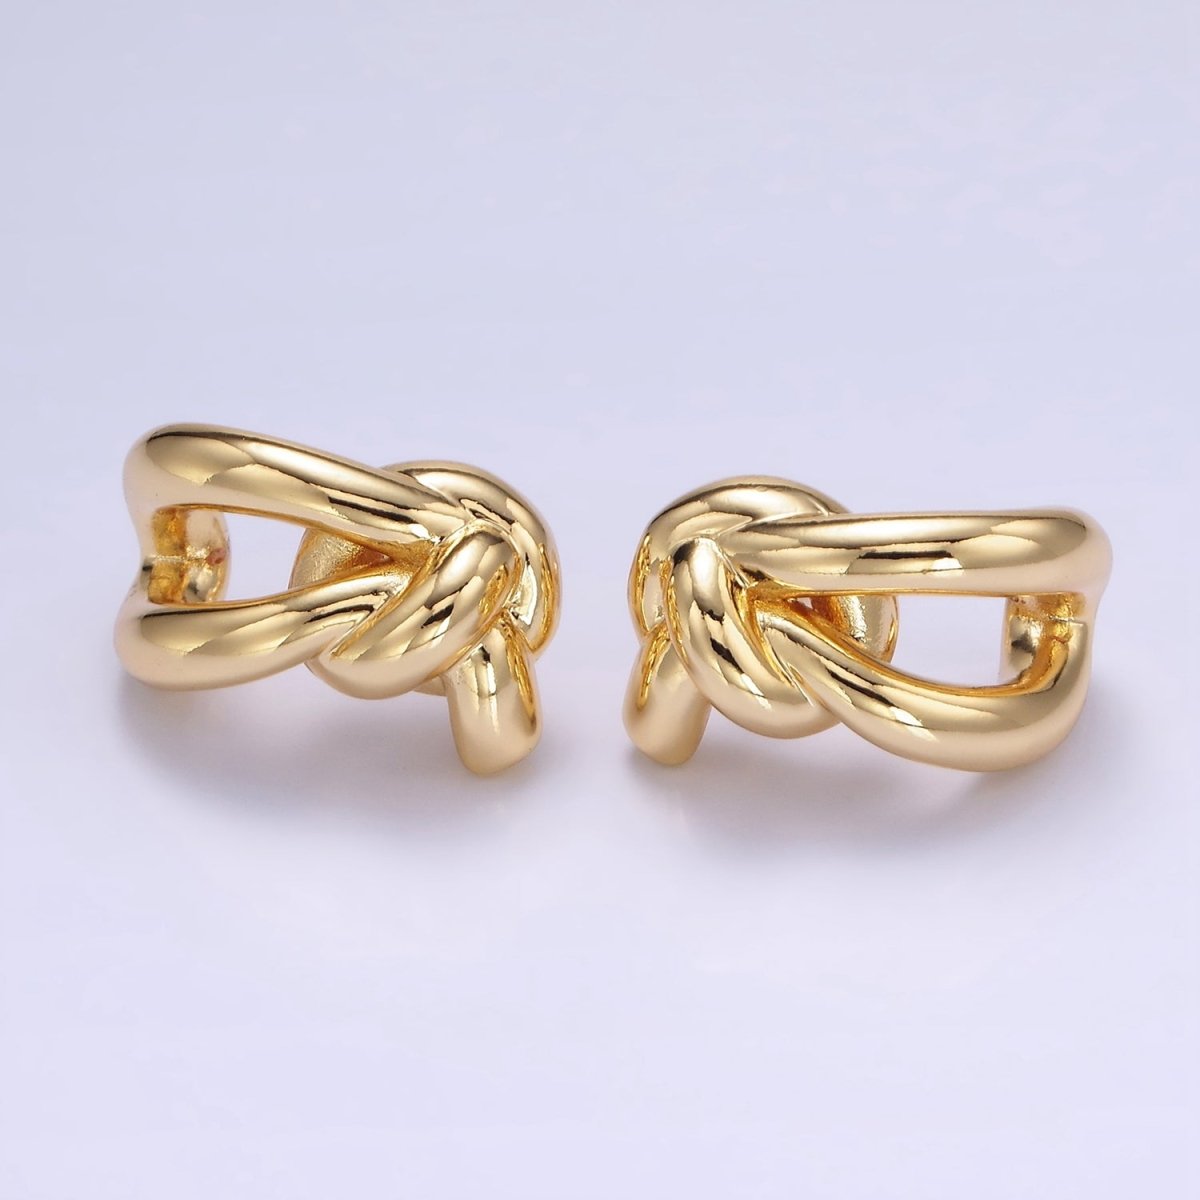 14K Gold Filled Knot Band C-Shaped Hoop Earrings | P506 - DLUXCA